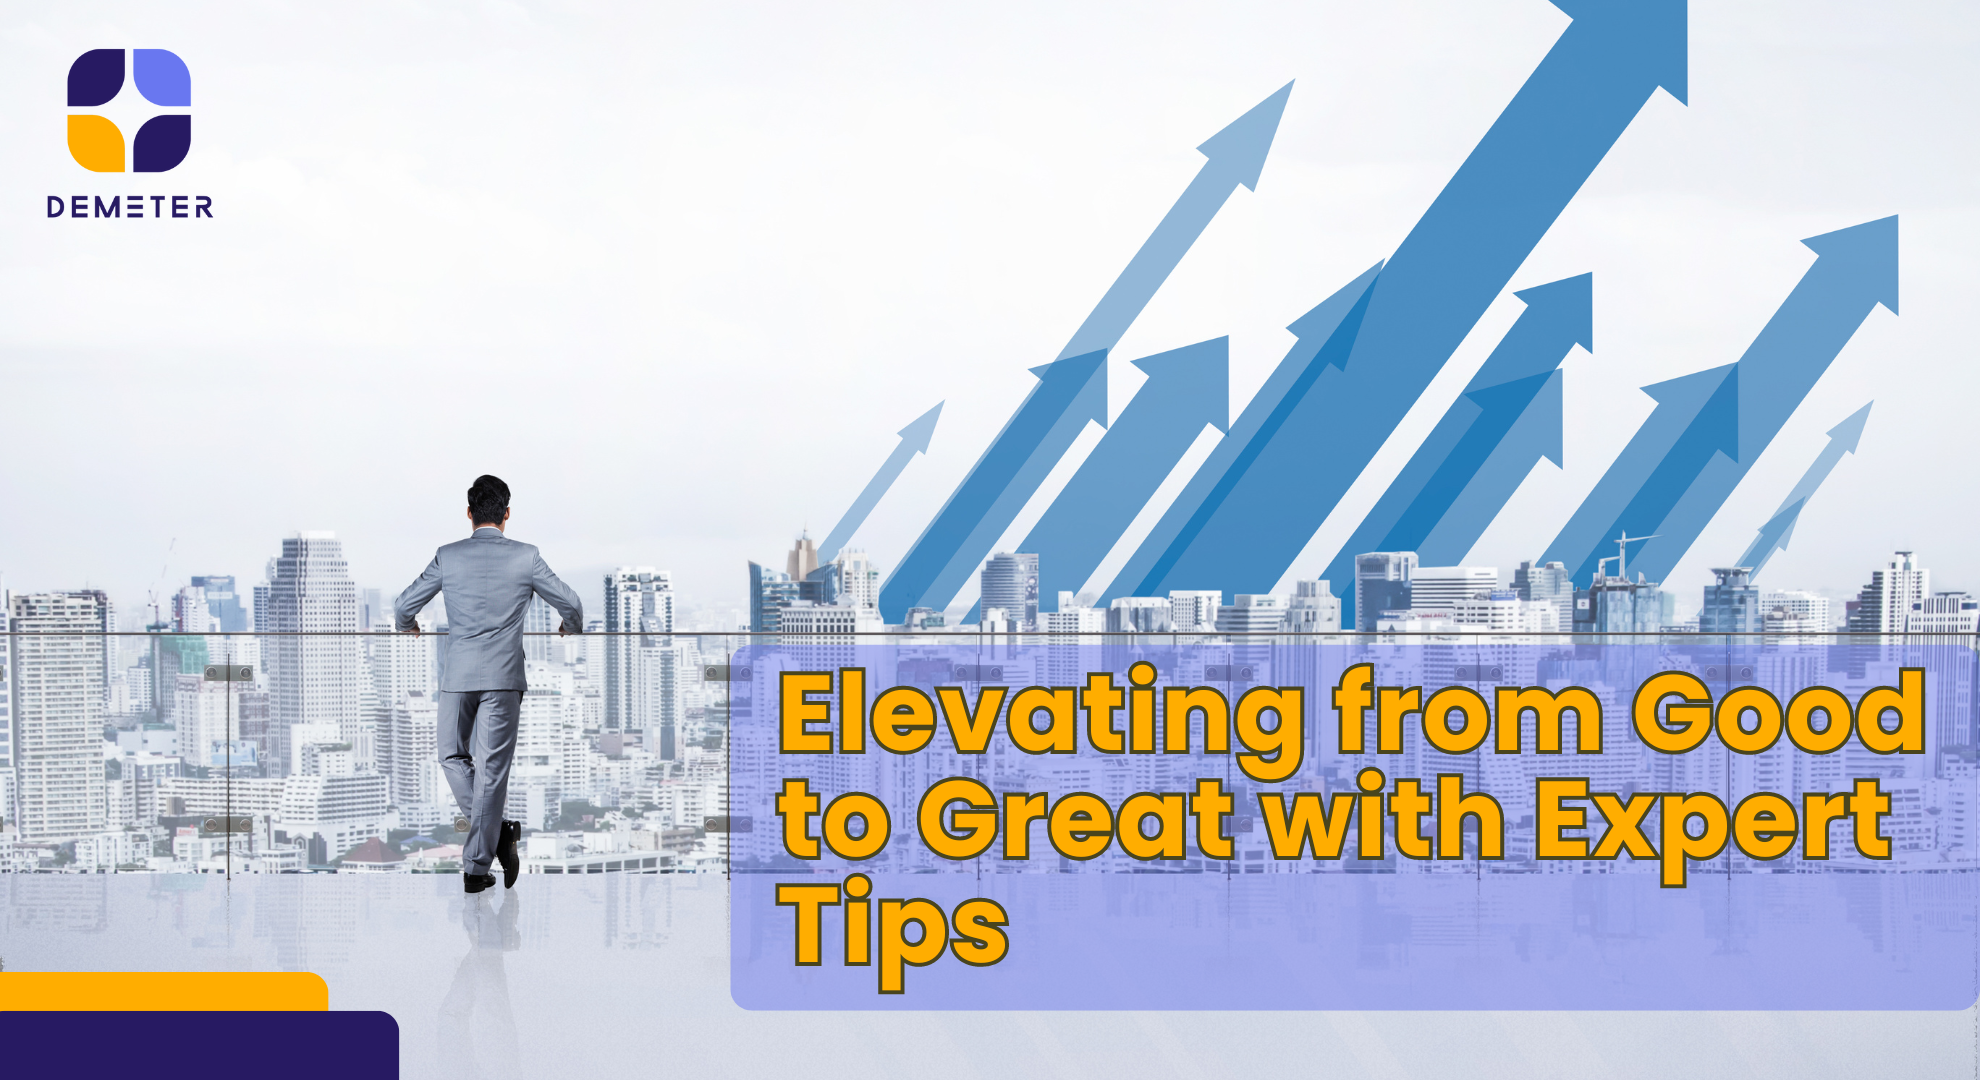 Customer Experience Elevating from Good to Great with Expert Tips